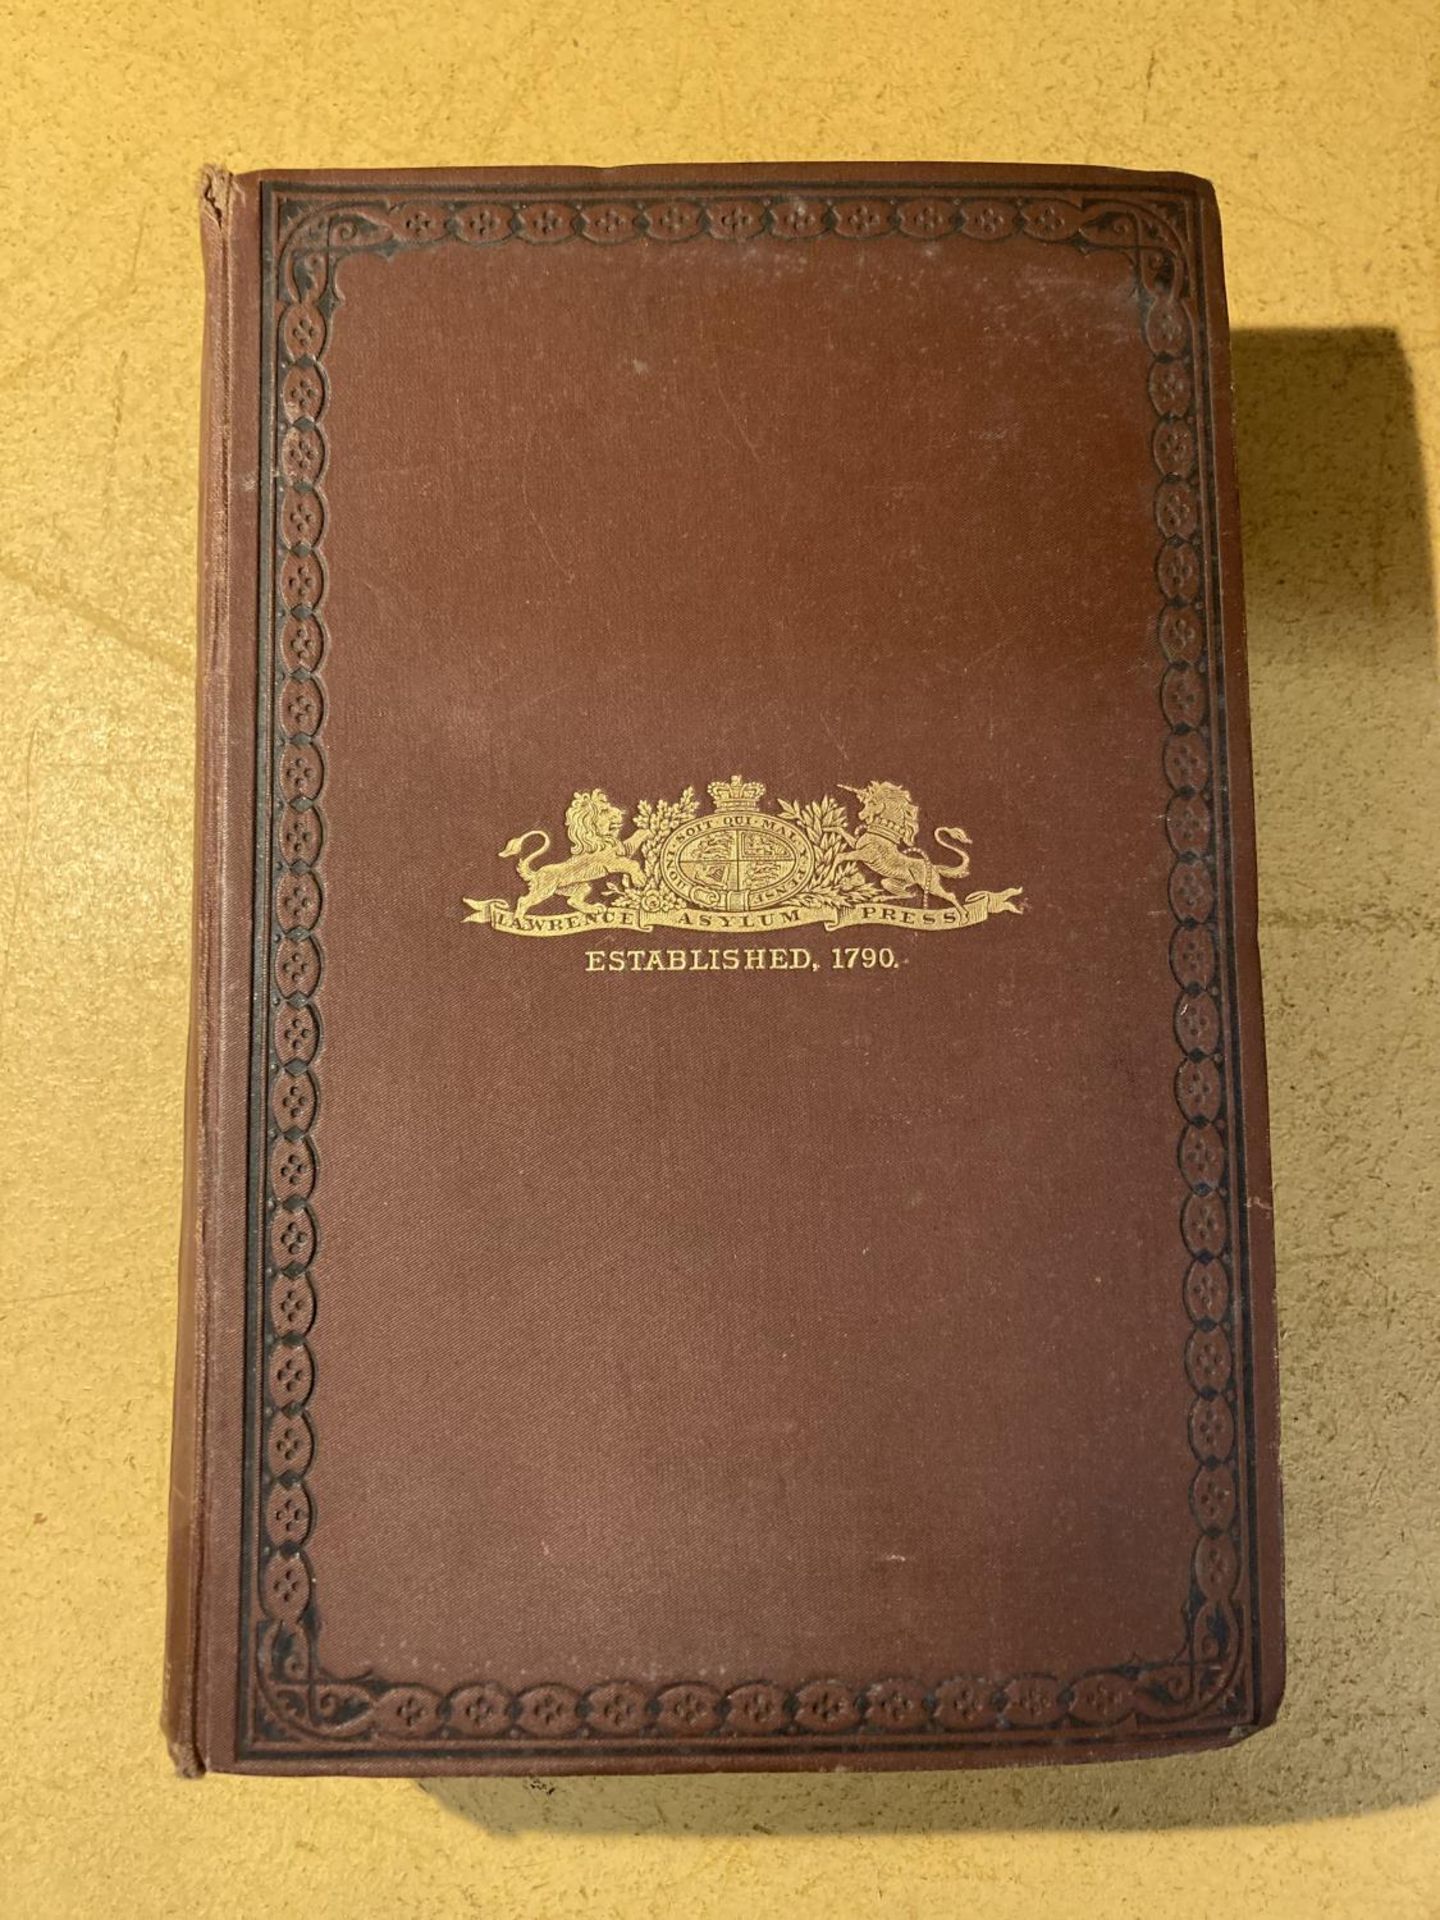 THE ASYLUM PRESS ALMANAC "DIRECTORY" AND COMPENDIUM OF INTELLIGENCE FOR 1903 PUBLISHED BY MADRAS